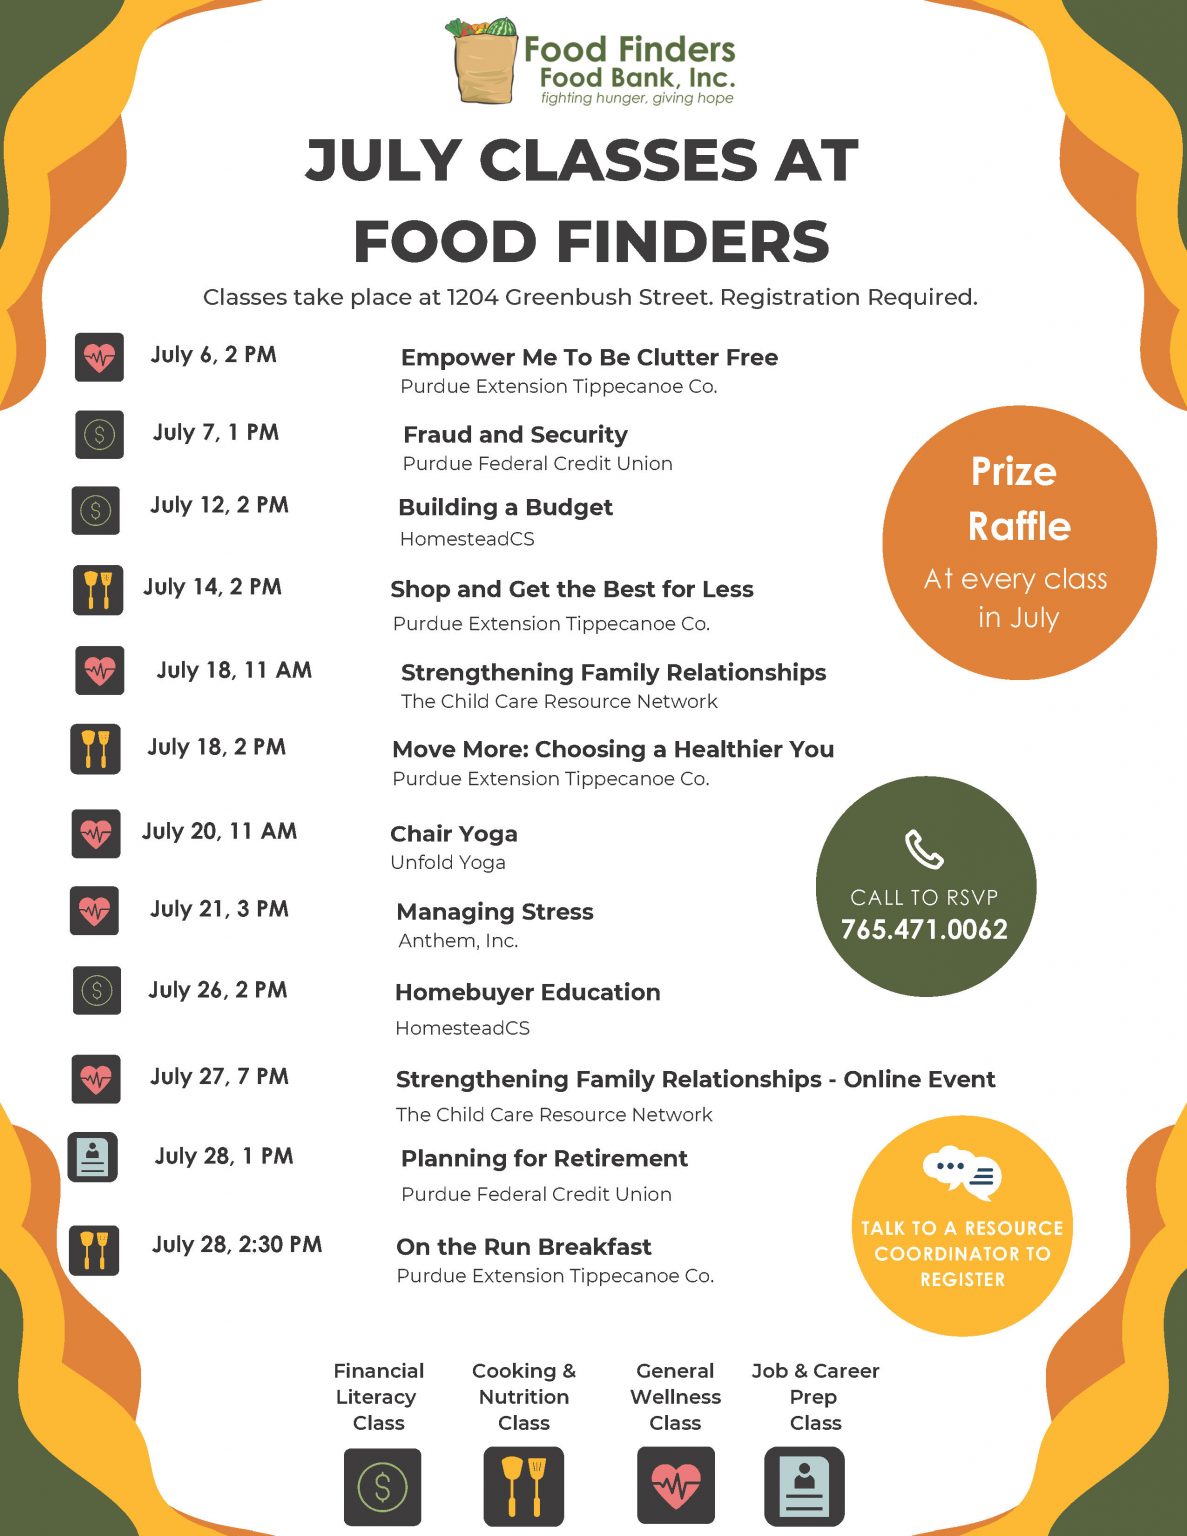 Food Finders July Classes 2022 Education Classes